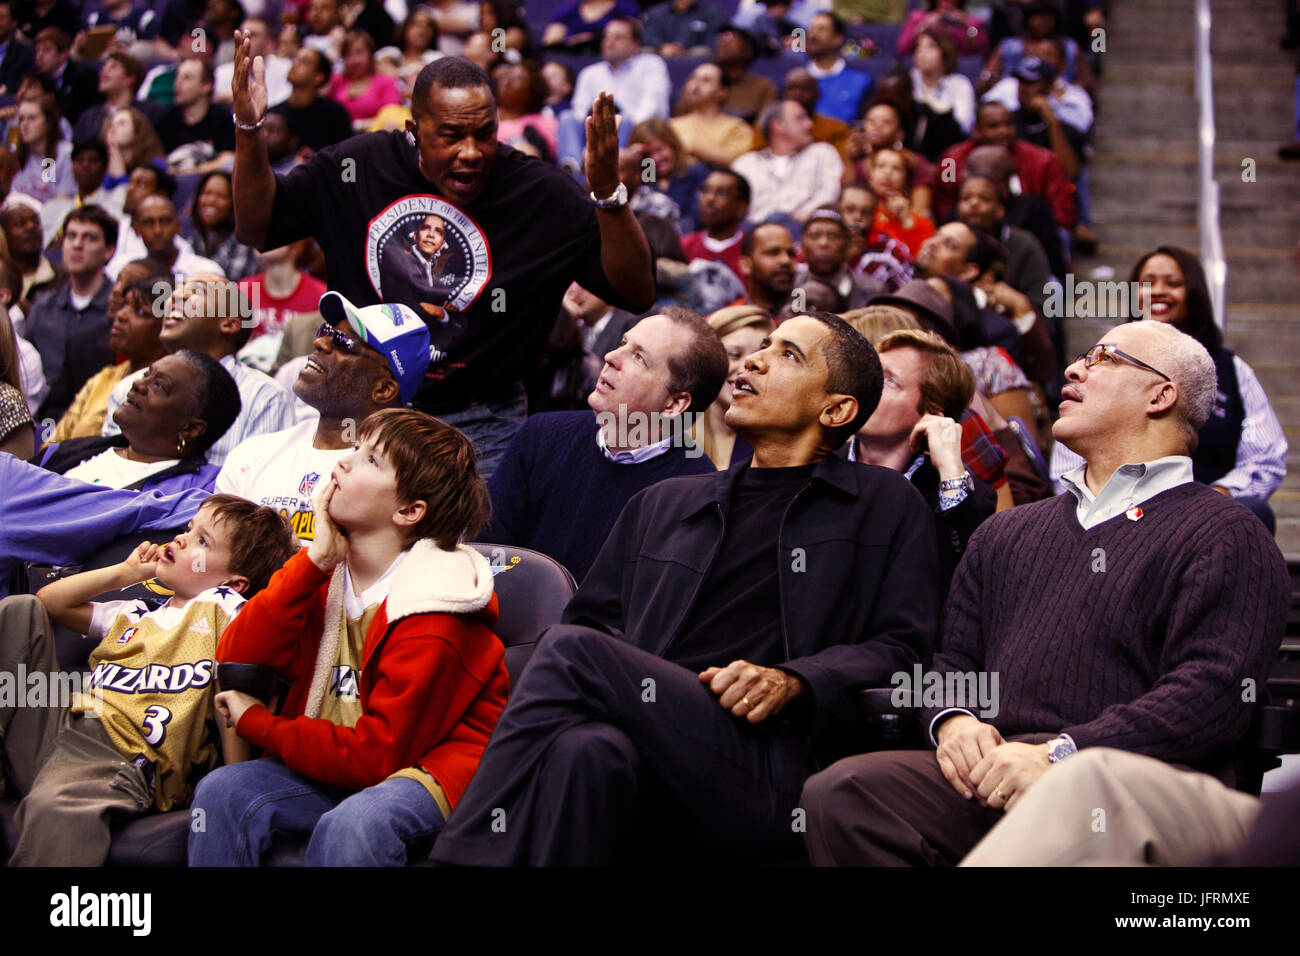 President Barack Obama attends a Washington Wizards vs Chicago Bulls basketball game at the Verizon Center, Washington, D.C 2/27/09.  Official White House Photo by Pete Souza Stock Photo